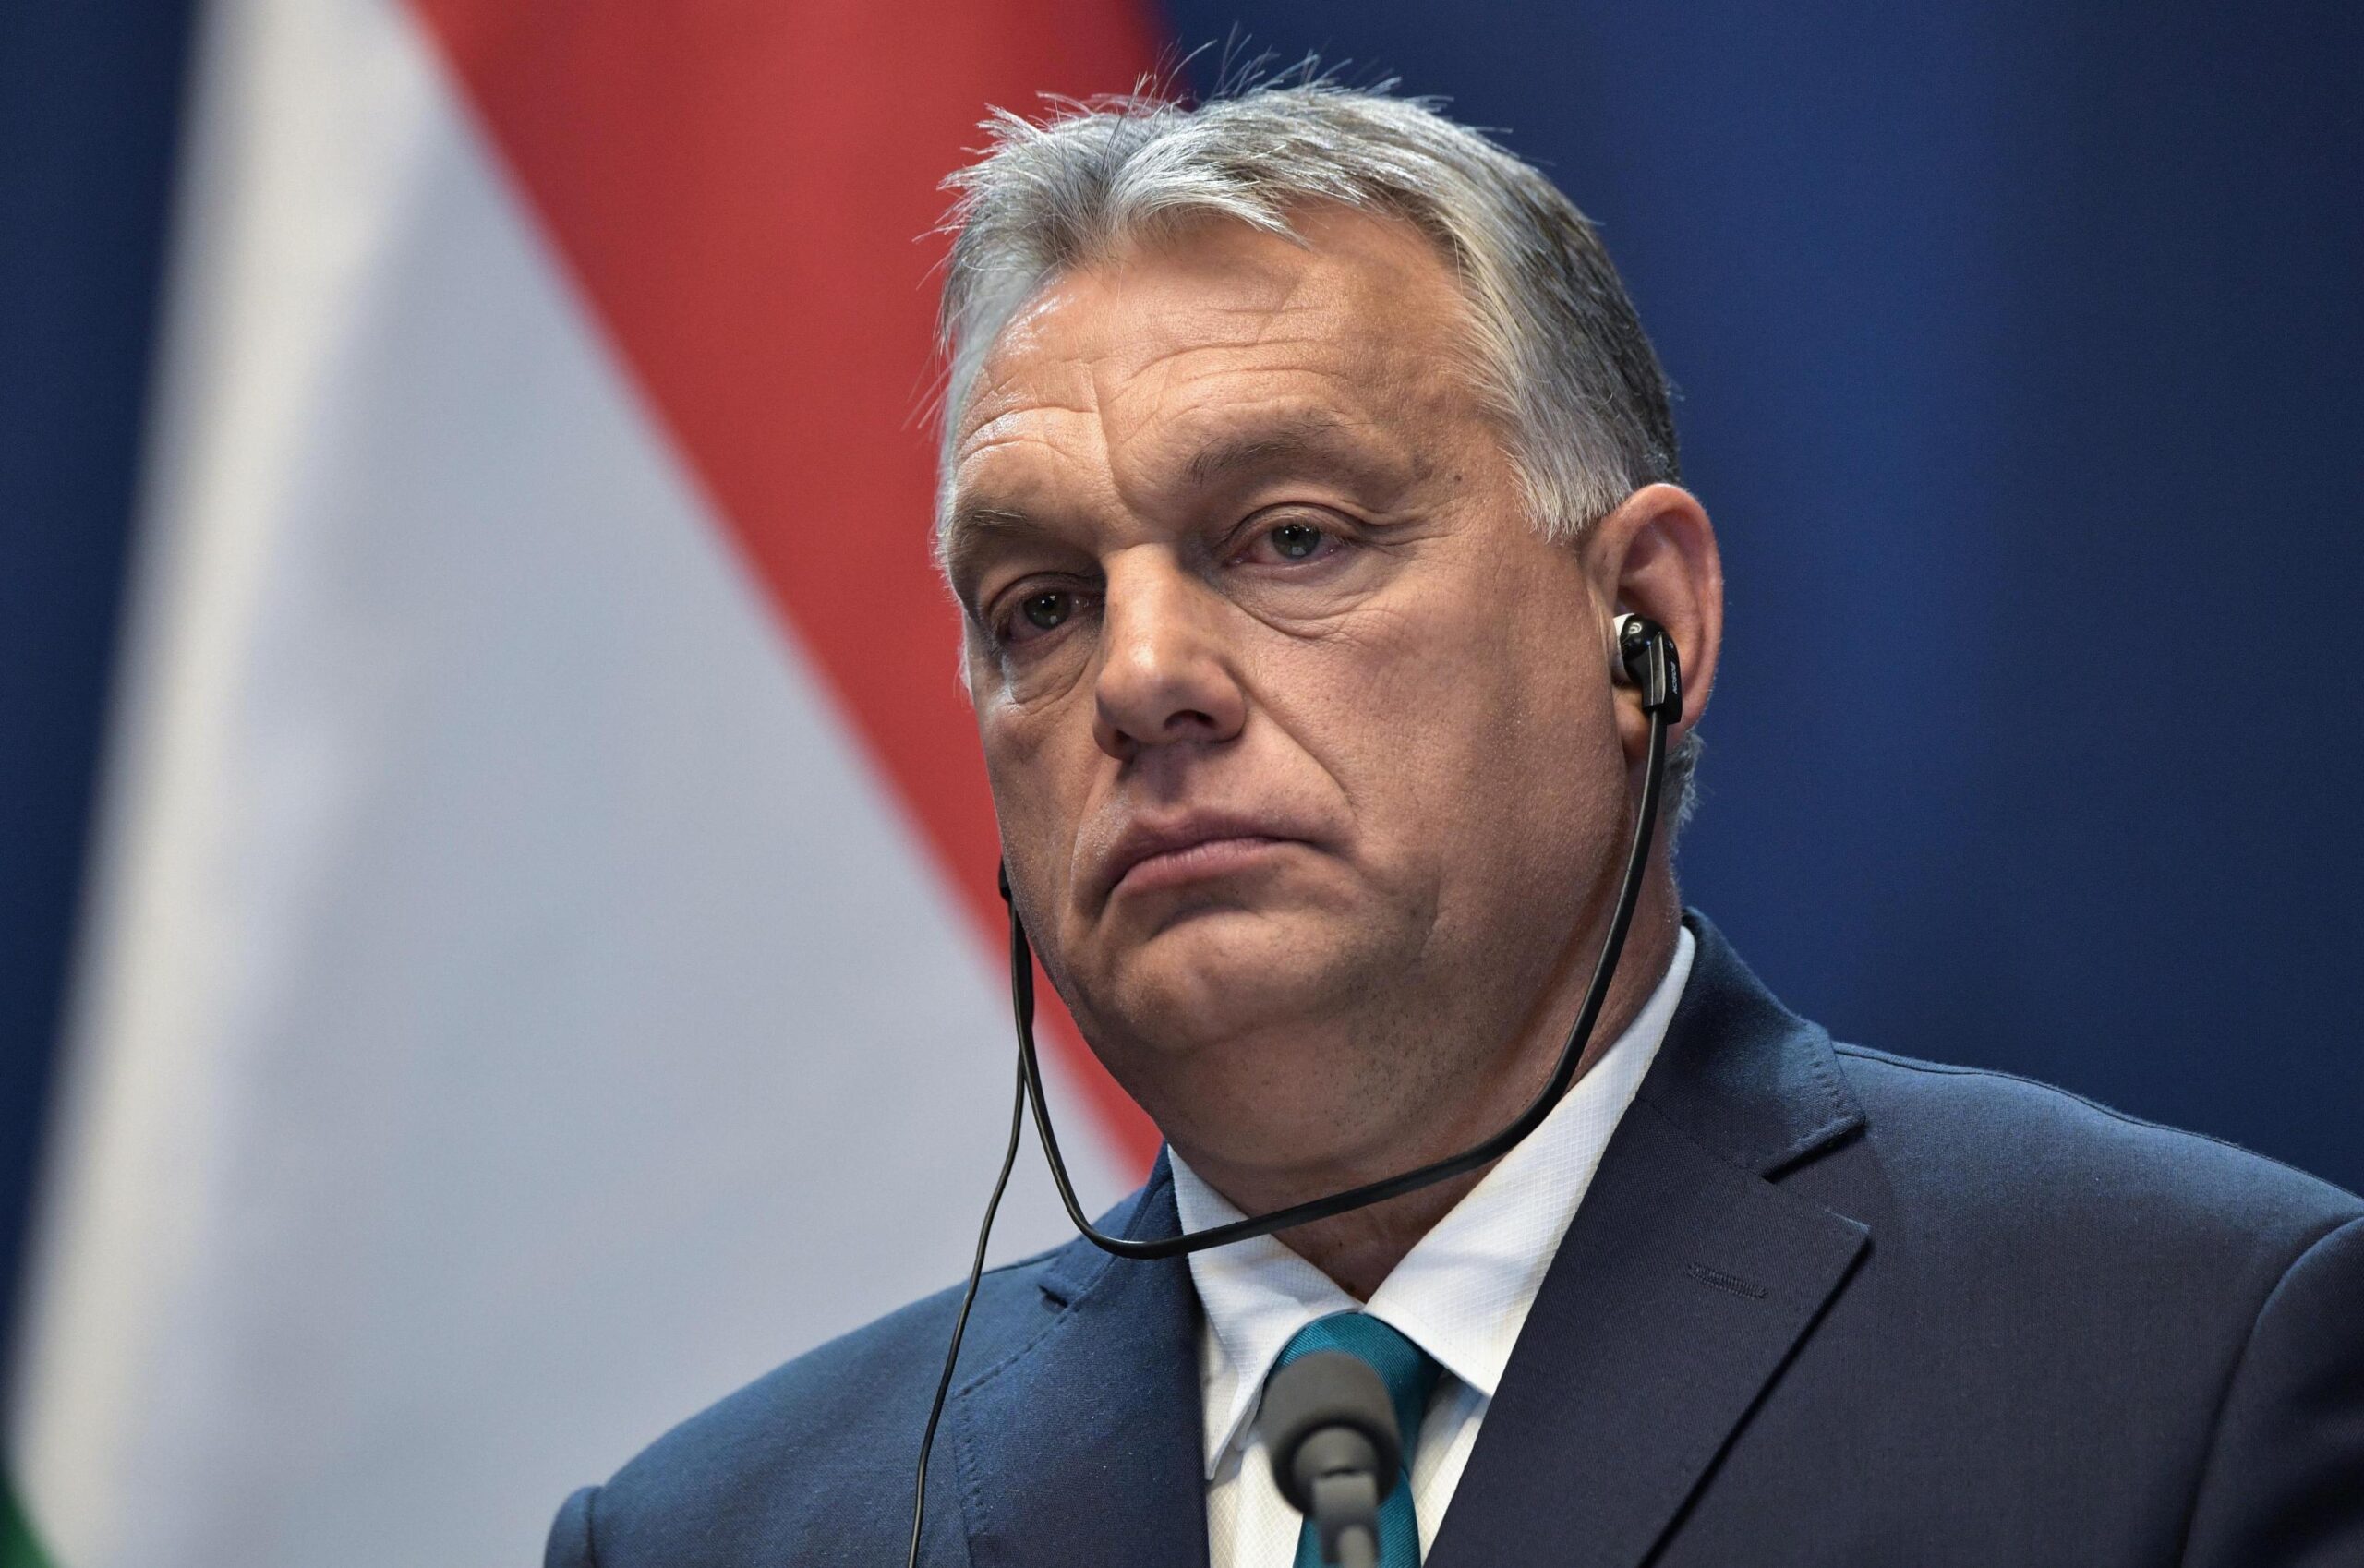 Hungarian Prime Minister Viktor Orban attend a joint news conference with Russian President Vladimir Putin (not pictured)  following their talks in Budapest, Hungary, 30 October 2019. Russian President Vladimir Putin is on a working visit to Hungary.  ANSA/ALEXEI NIKOLSKY / SPUTNIK  / KREMLIN POOL MANDATORY CREDIT